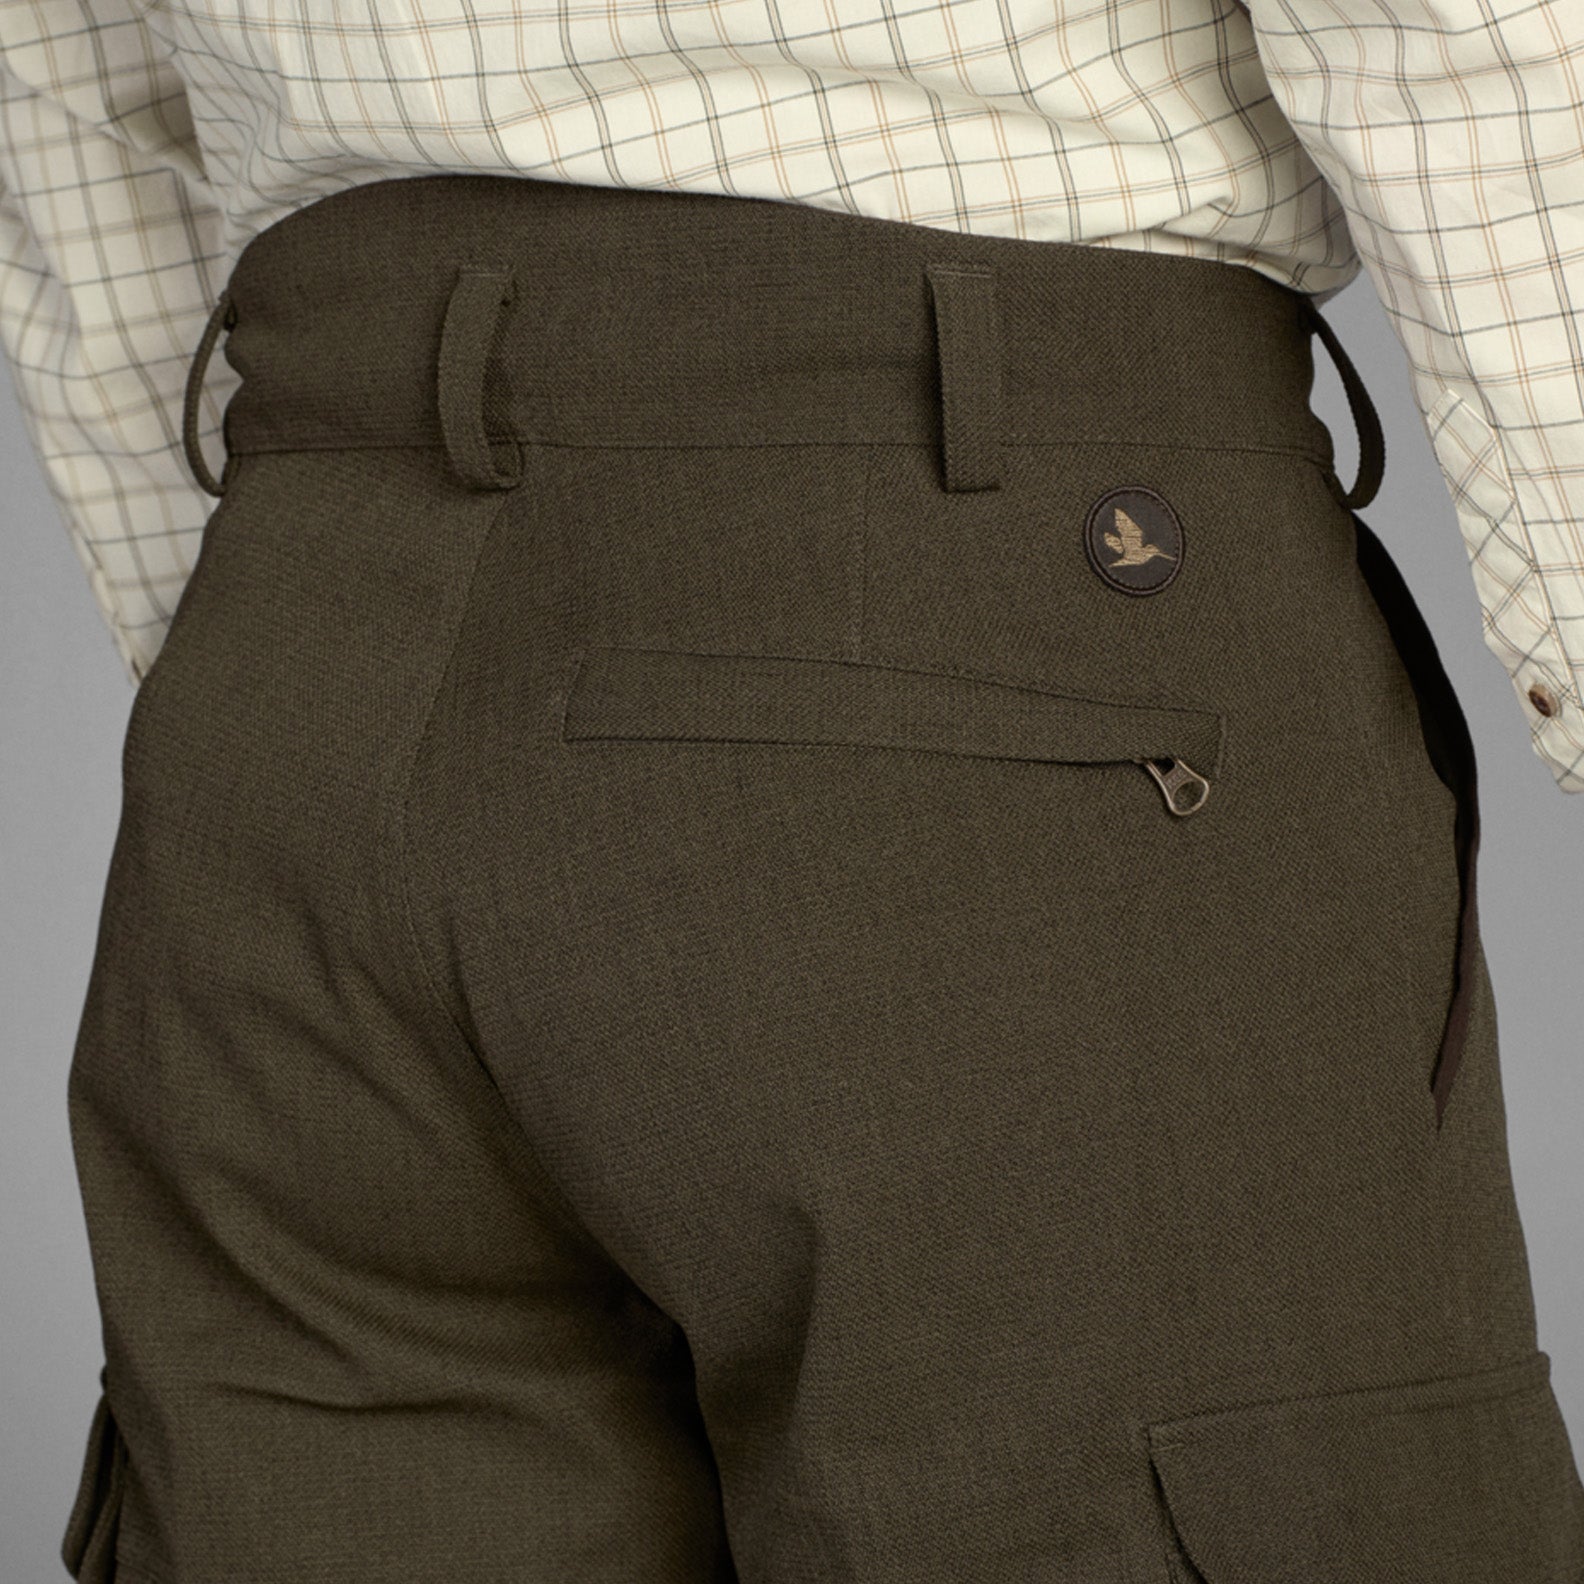 Seeland Woodcock Advanced Men's Trousers | New Forest Clothing